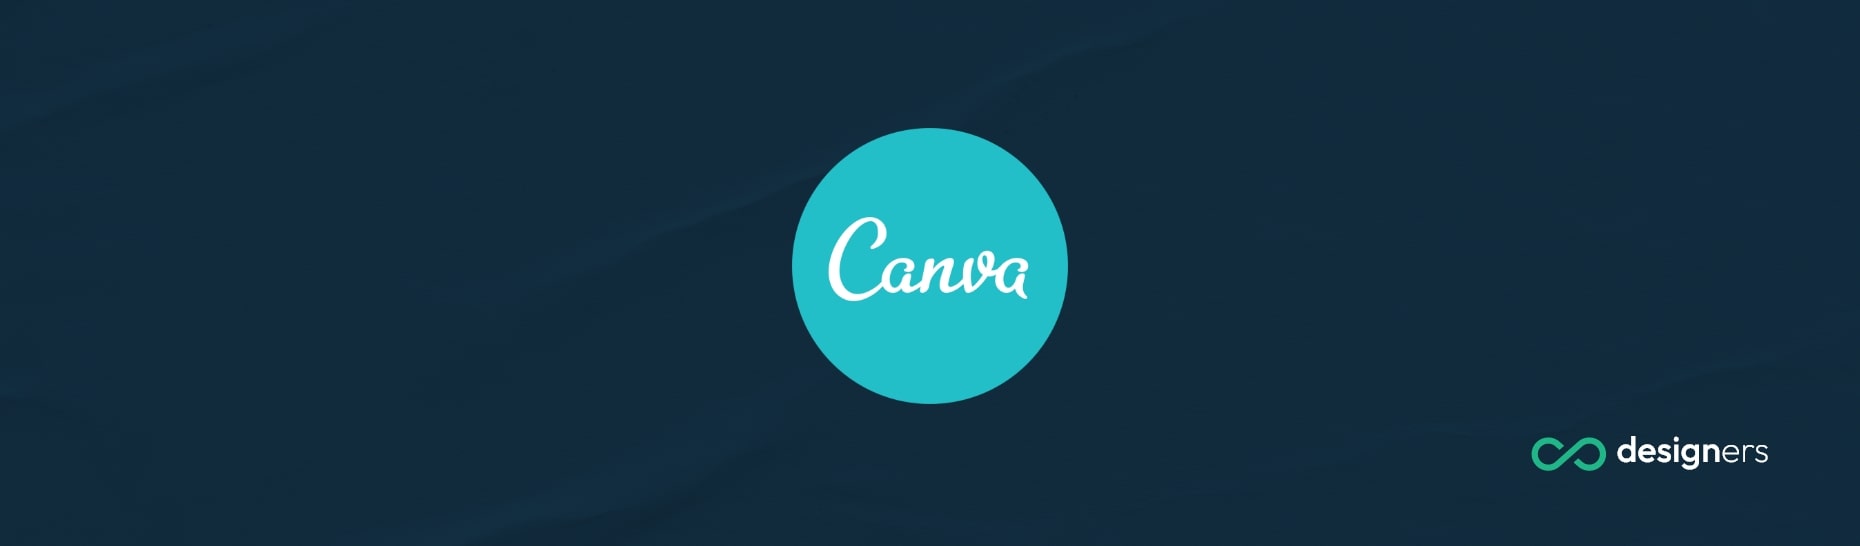 Does Canva Ship to UK?